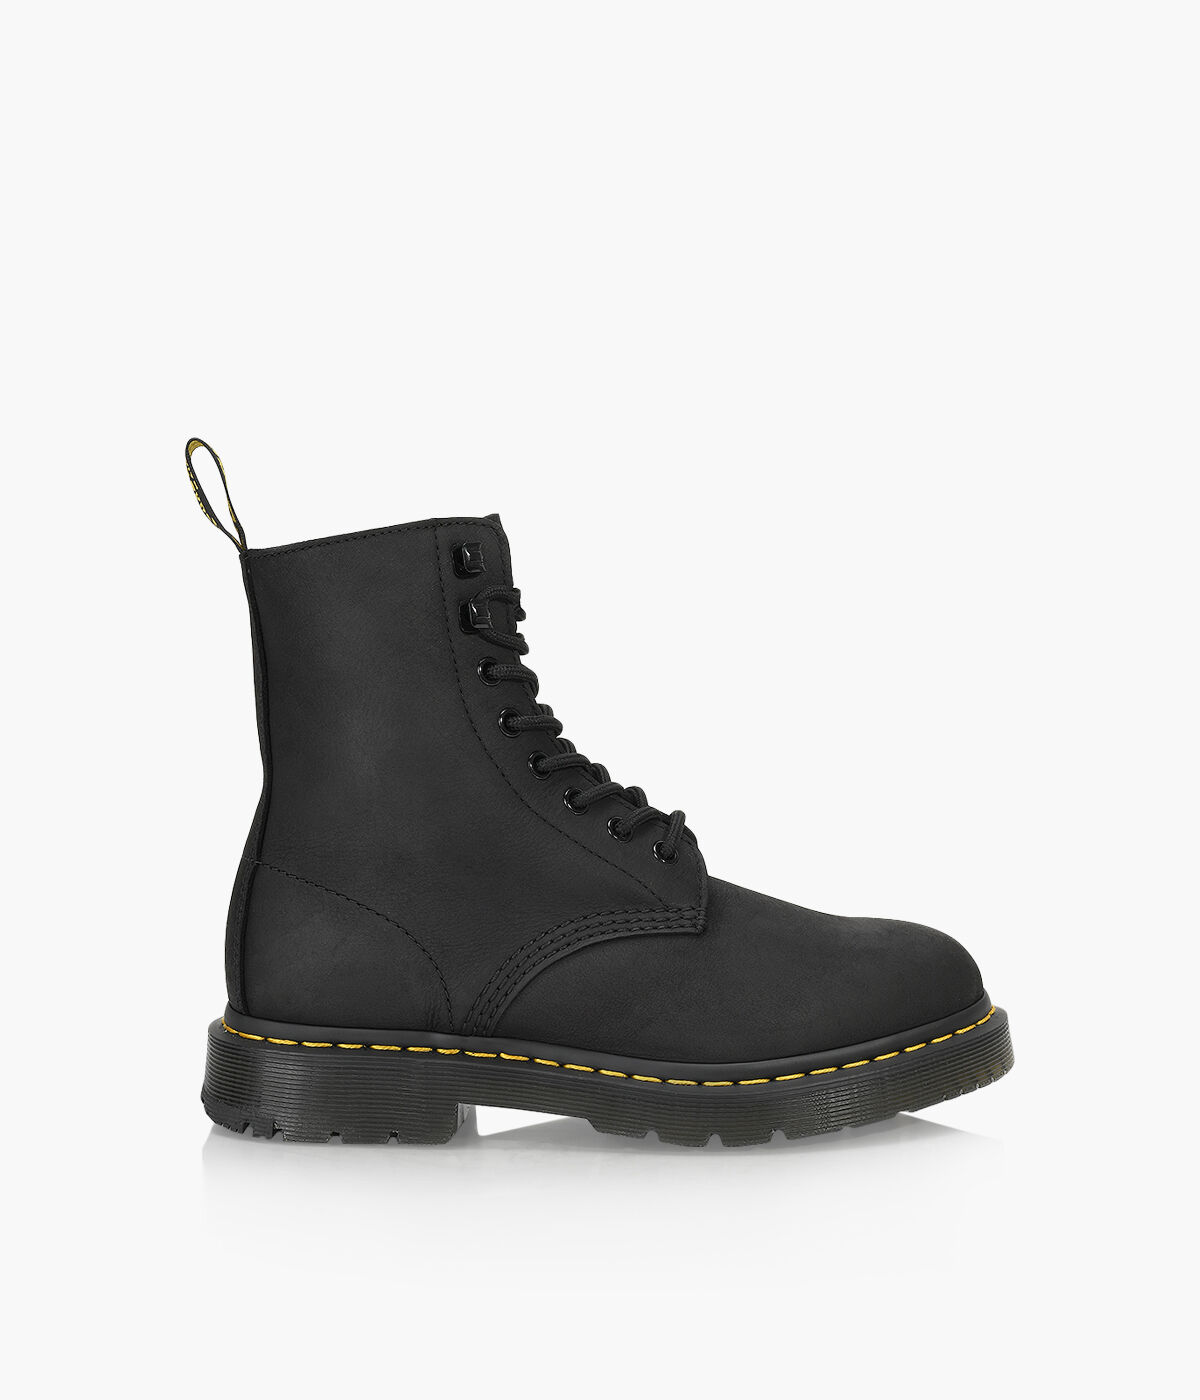 DR. MARTENS 1460 PASCAL WINTERGRIP - Black Leather | Browns Shoes